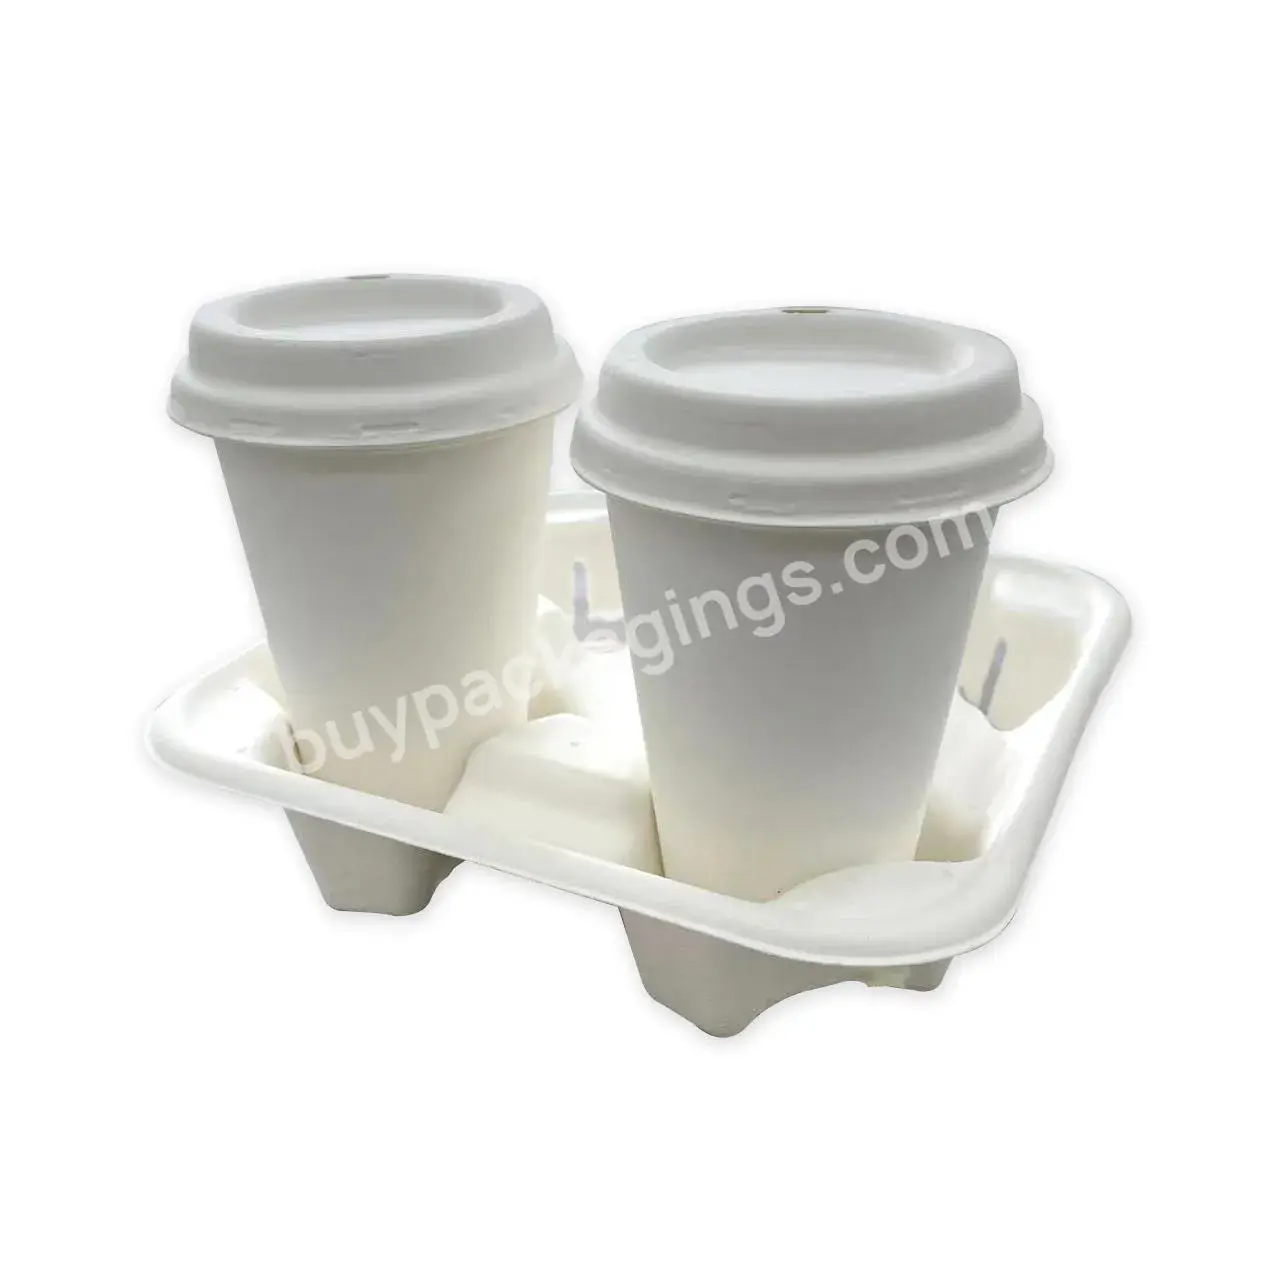 Disposable Pulp Fiber Containers Pulp Coffee 4 Cup Takeaway Take Away Drink Carrier Paper Cup Holder - Buy Take Away Drink Carrier Paper Cup Holder,Coffee Paper Cup Holder,Pulp Cup Holder 4 Cup Takeaway Carrier.